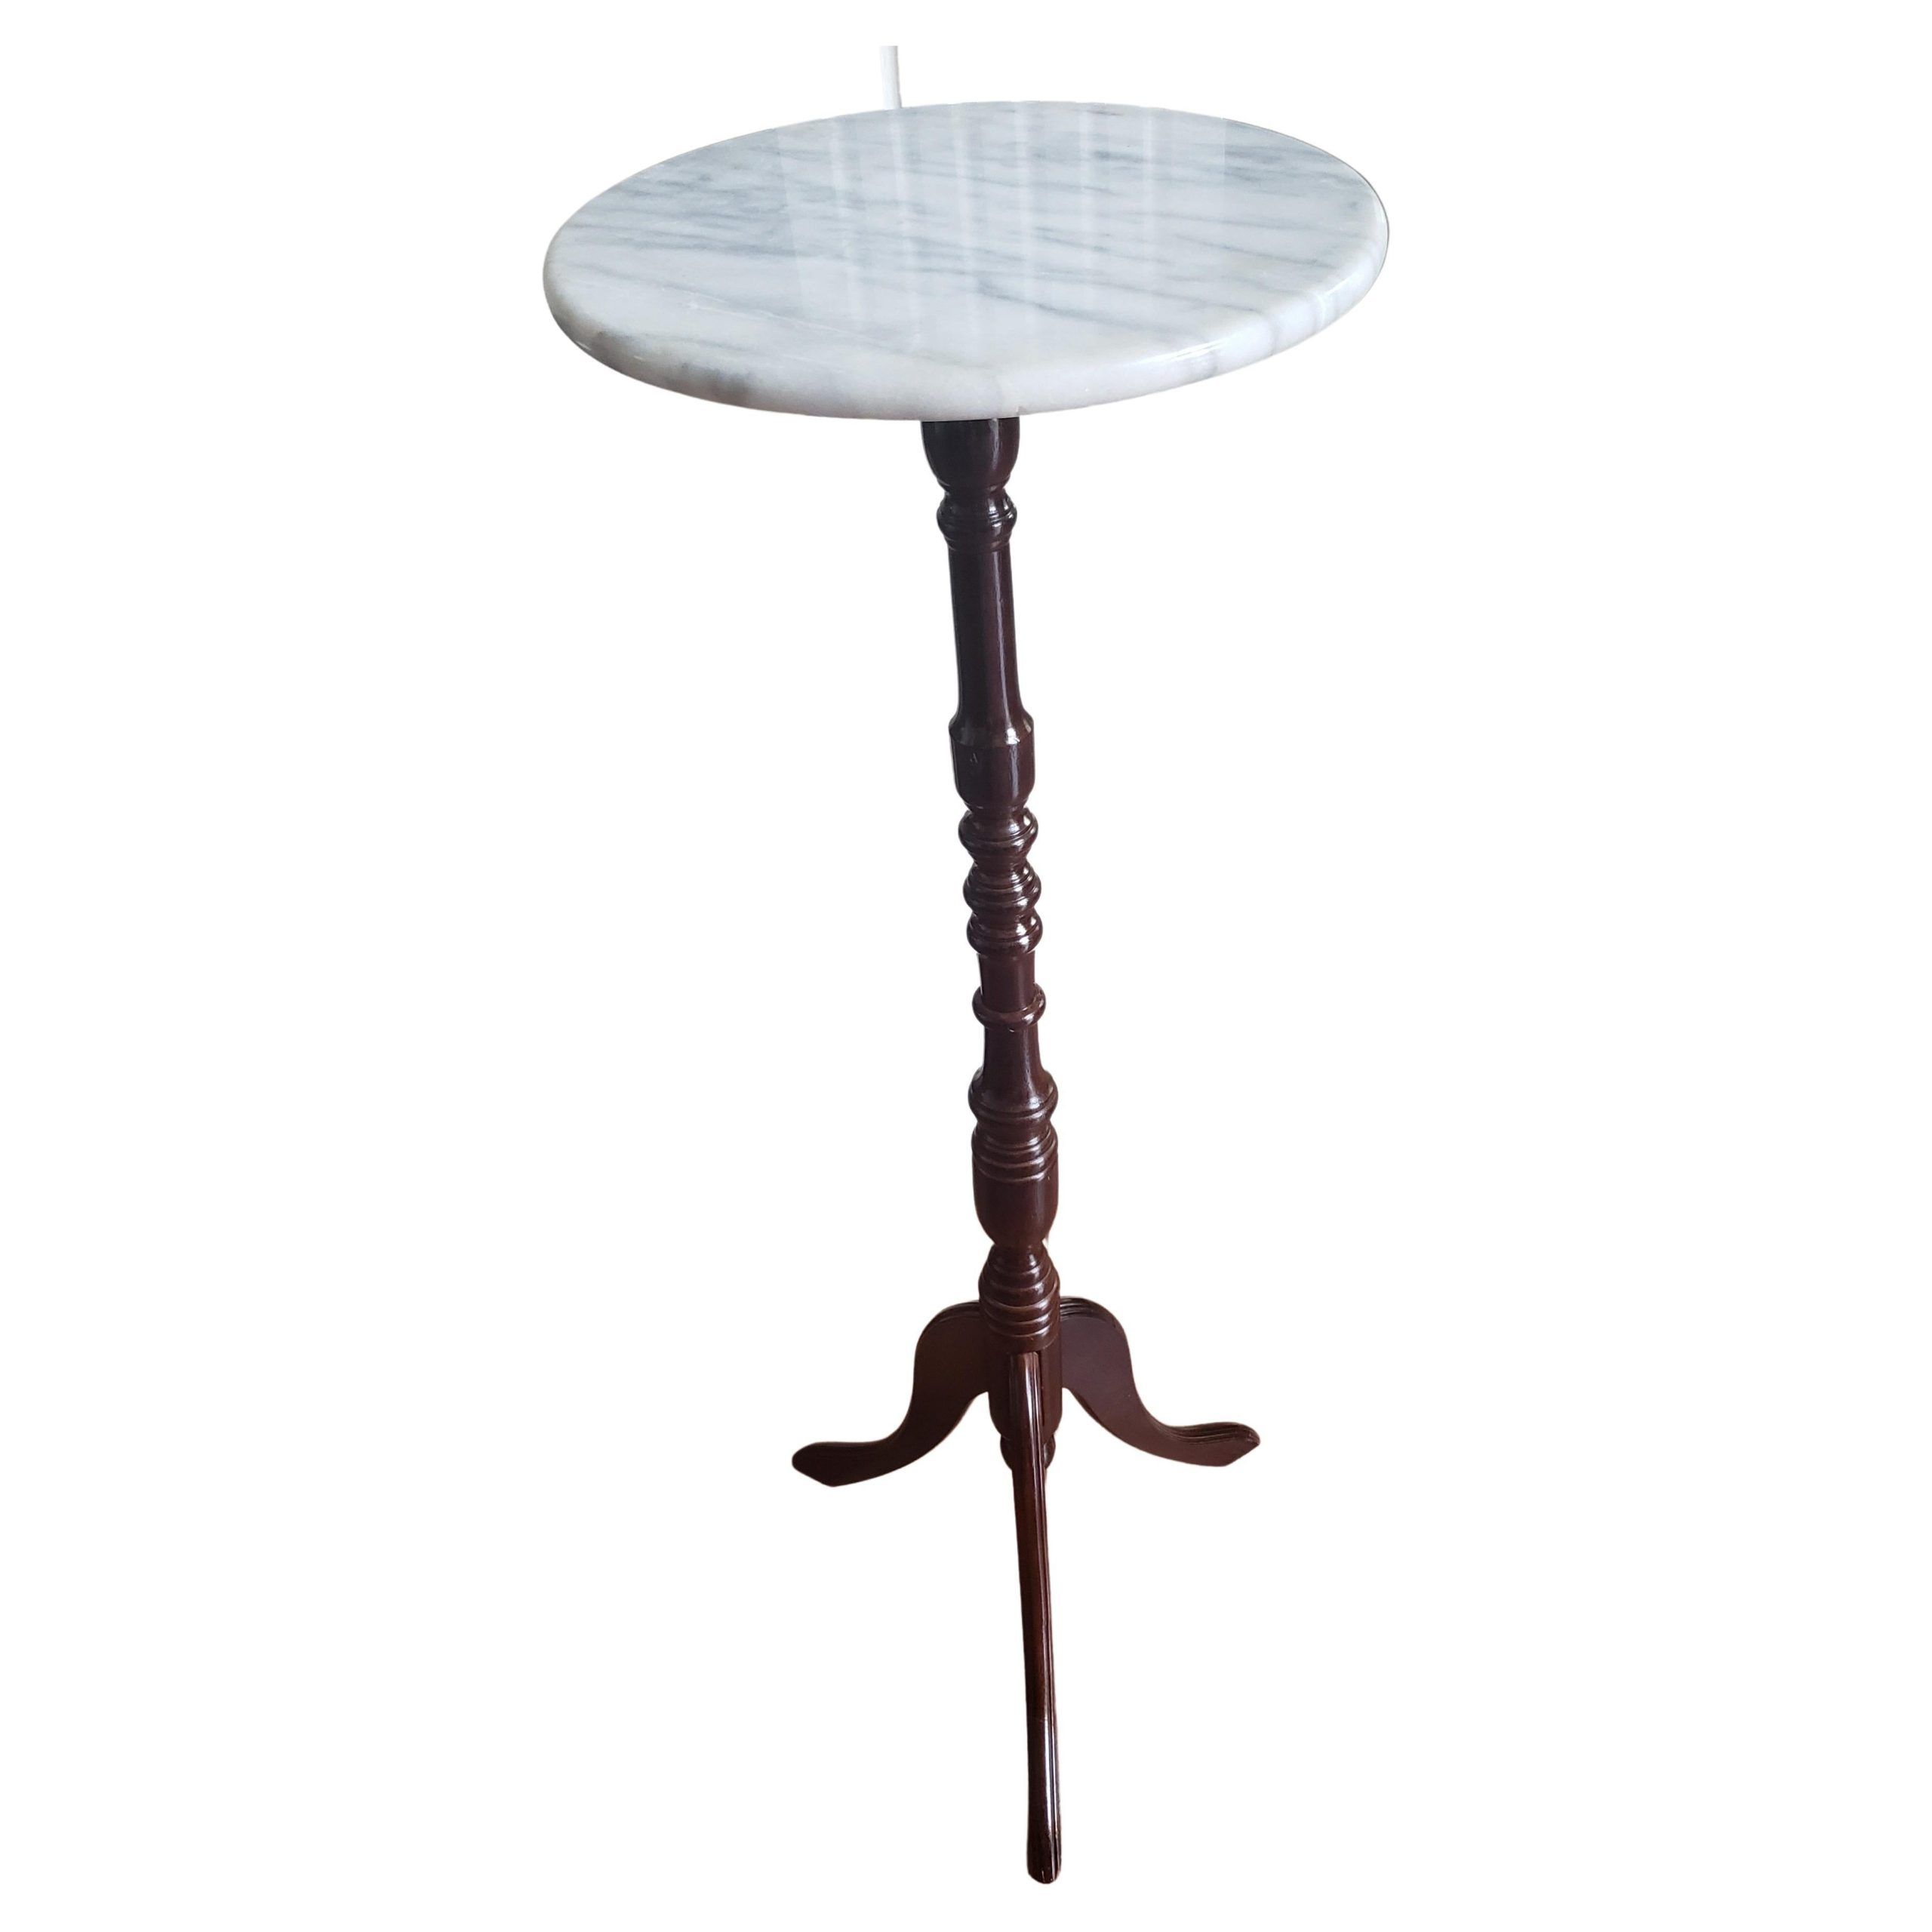 Pedestal Mahogany Plant Stand With Marble Top At 1stdibs | Marble Plant  Stand, Round Marble Top Plant Stand, Marble Top Plant Stand Pedestal With Regard To Marble Plant Stands (View 8 of 15)